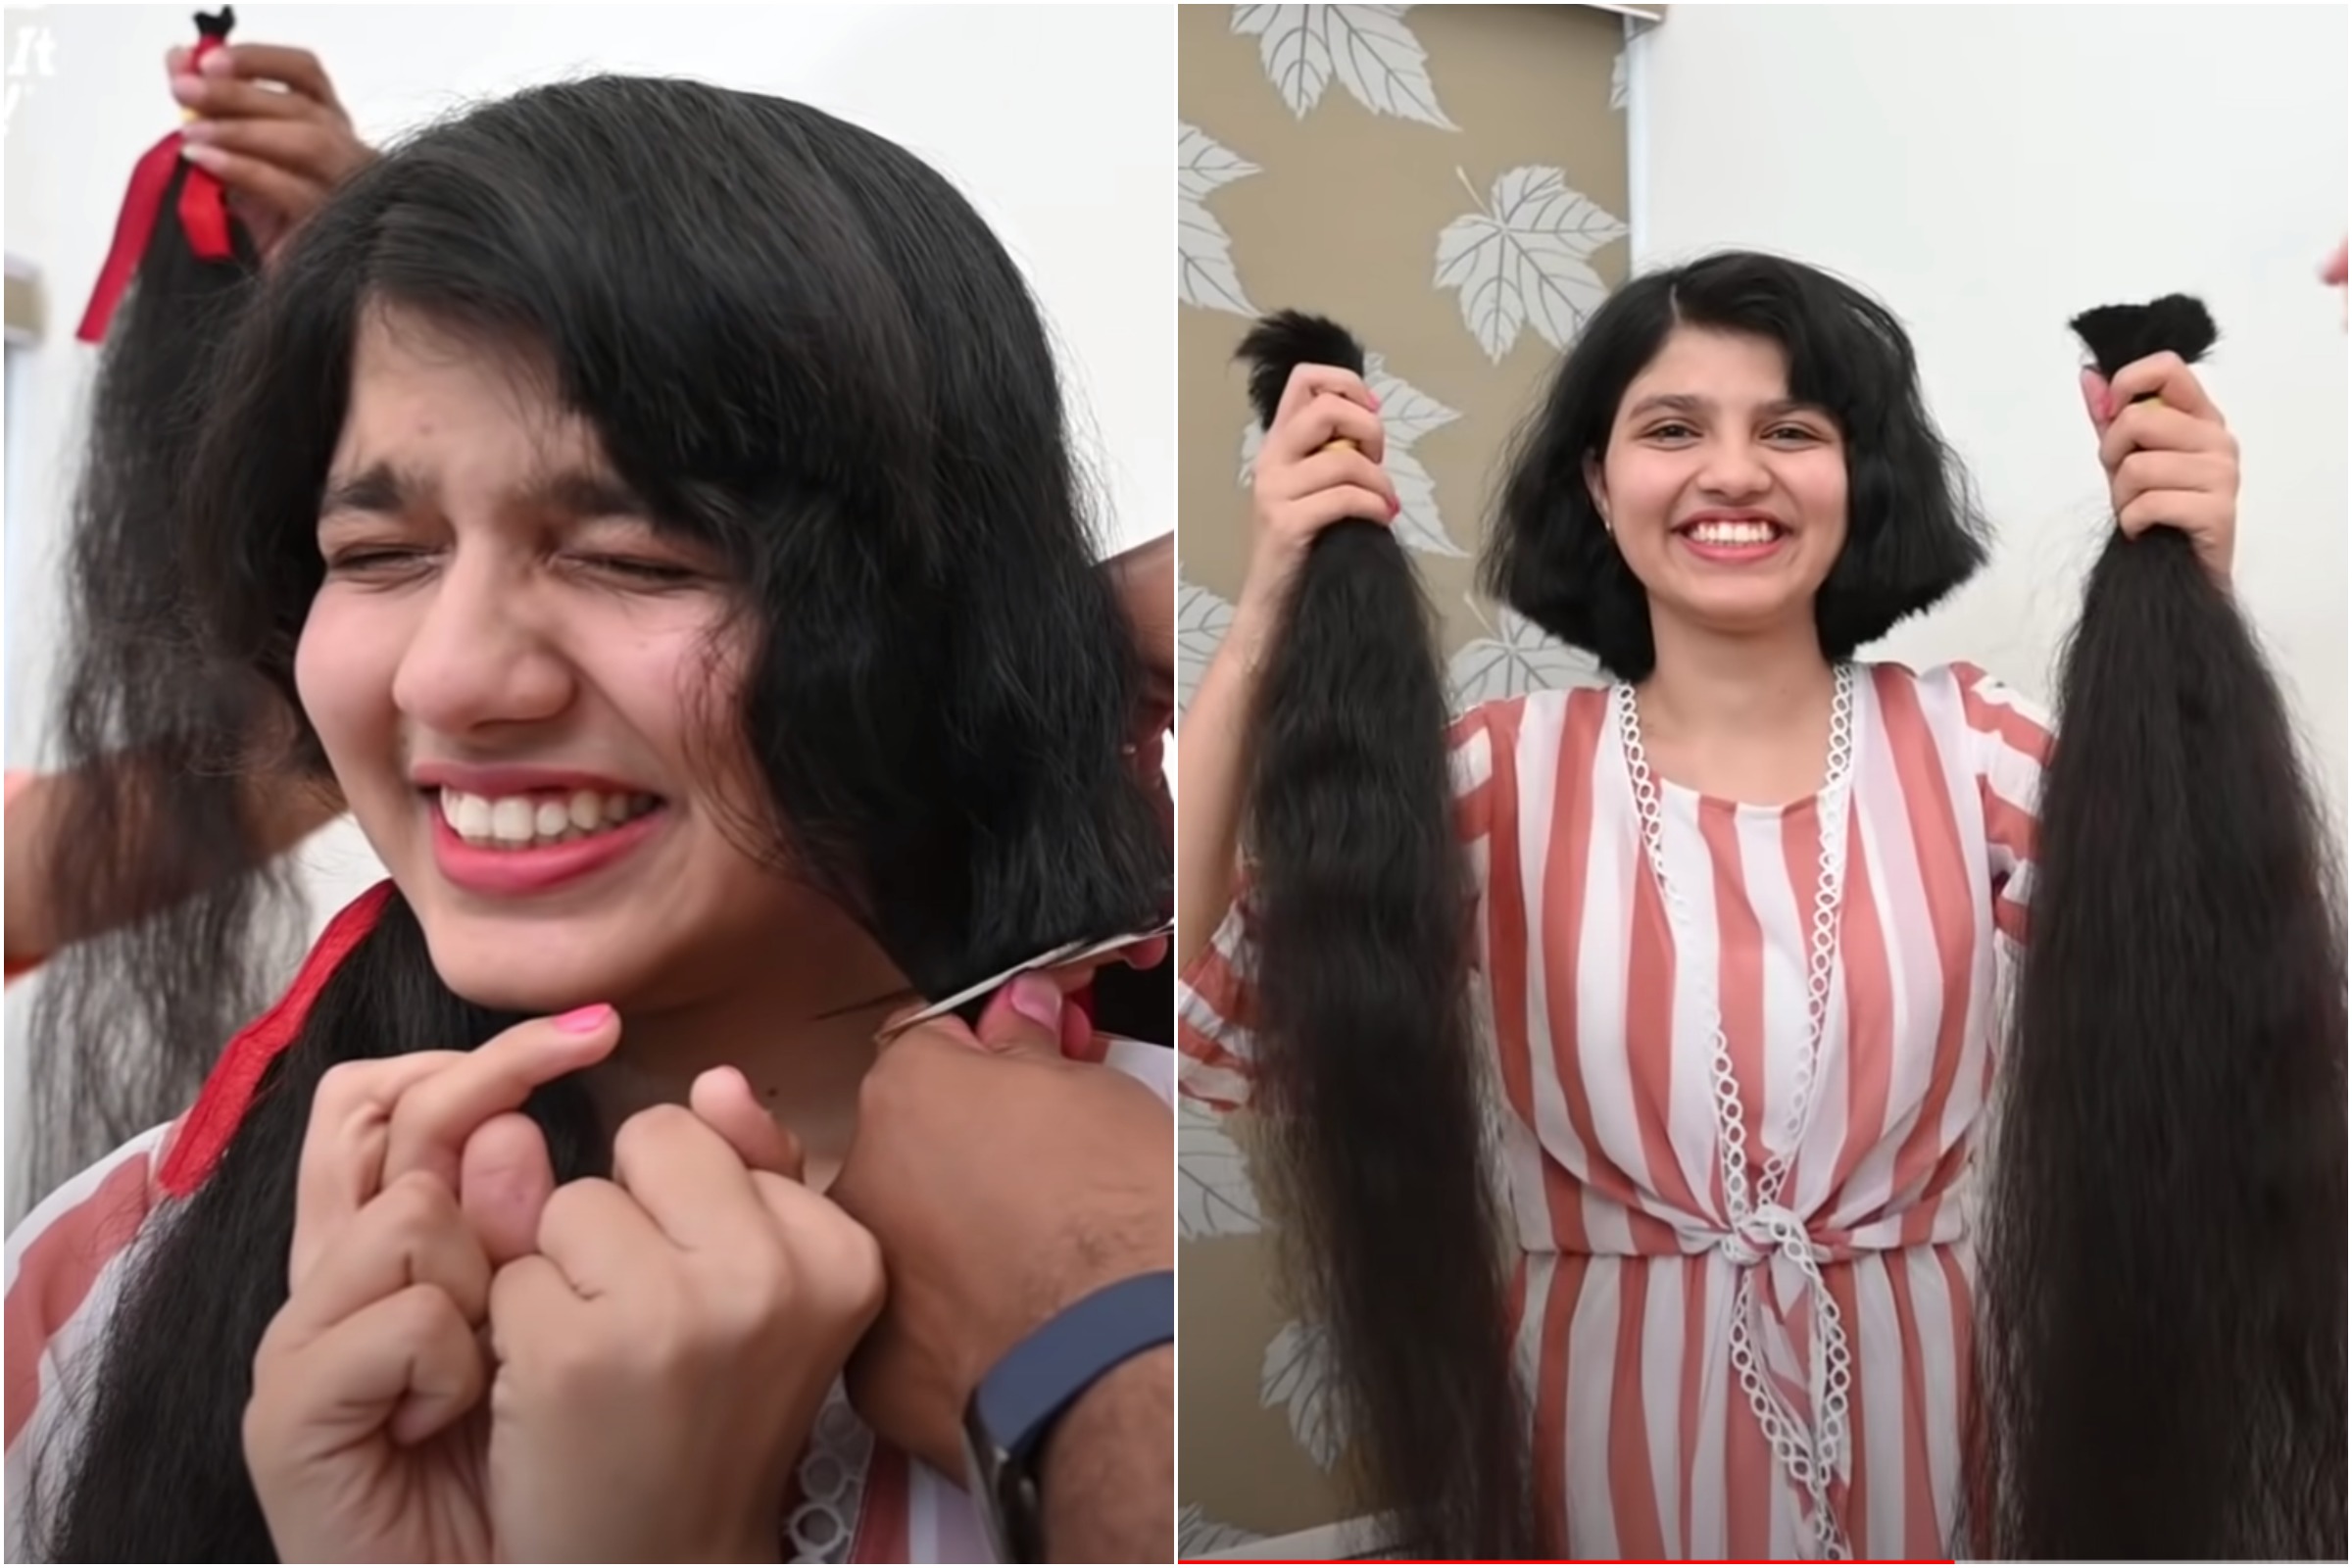 Teenage Rapunzel With World's Longest Hair at Over 6ft Finally Gets It Cut  After 12 Years